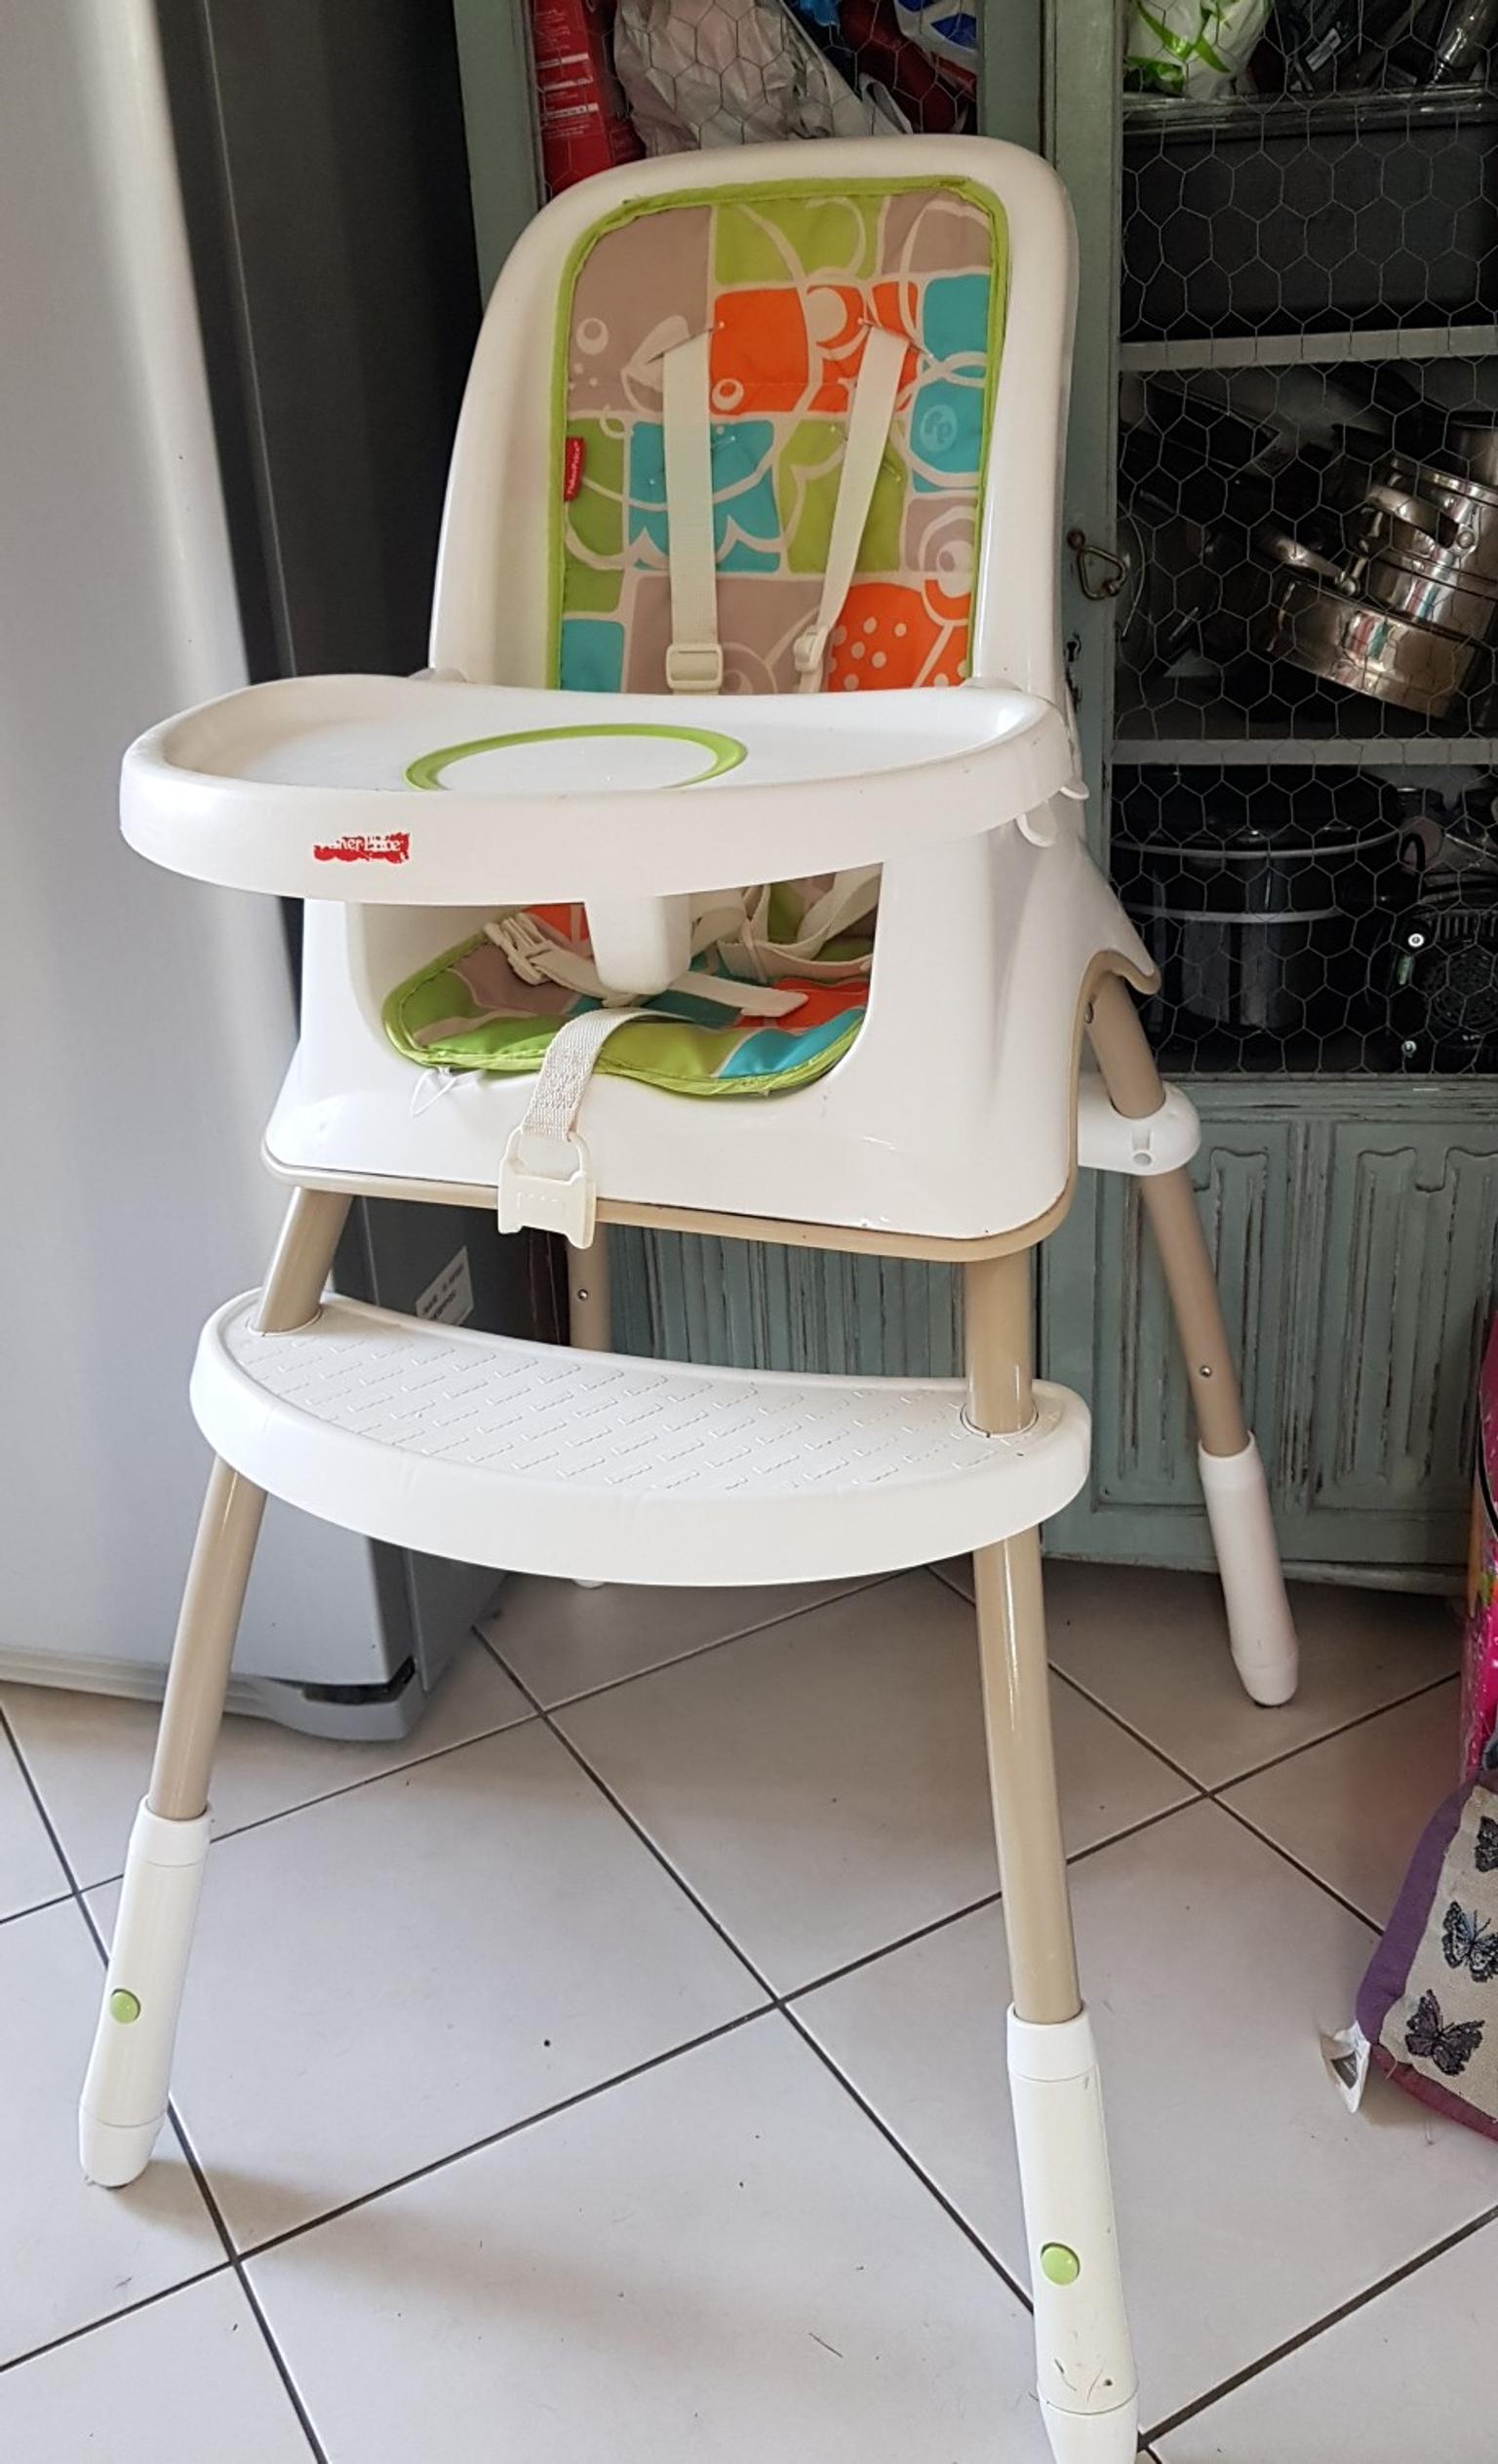 Fisher Price High Chair In De14 Staffordshire For 5 00 For Sale